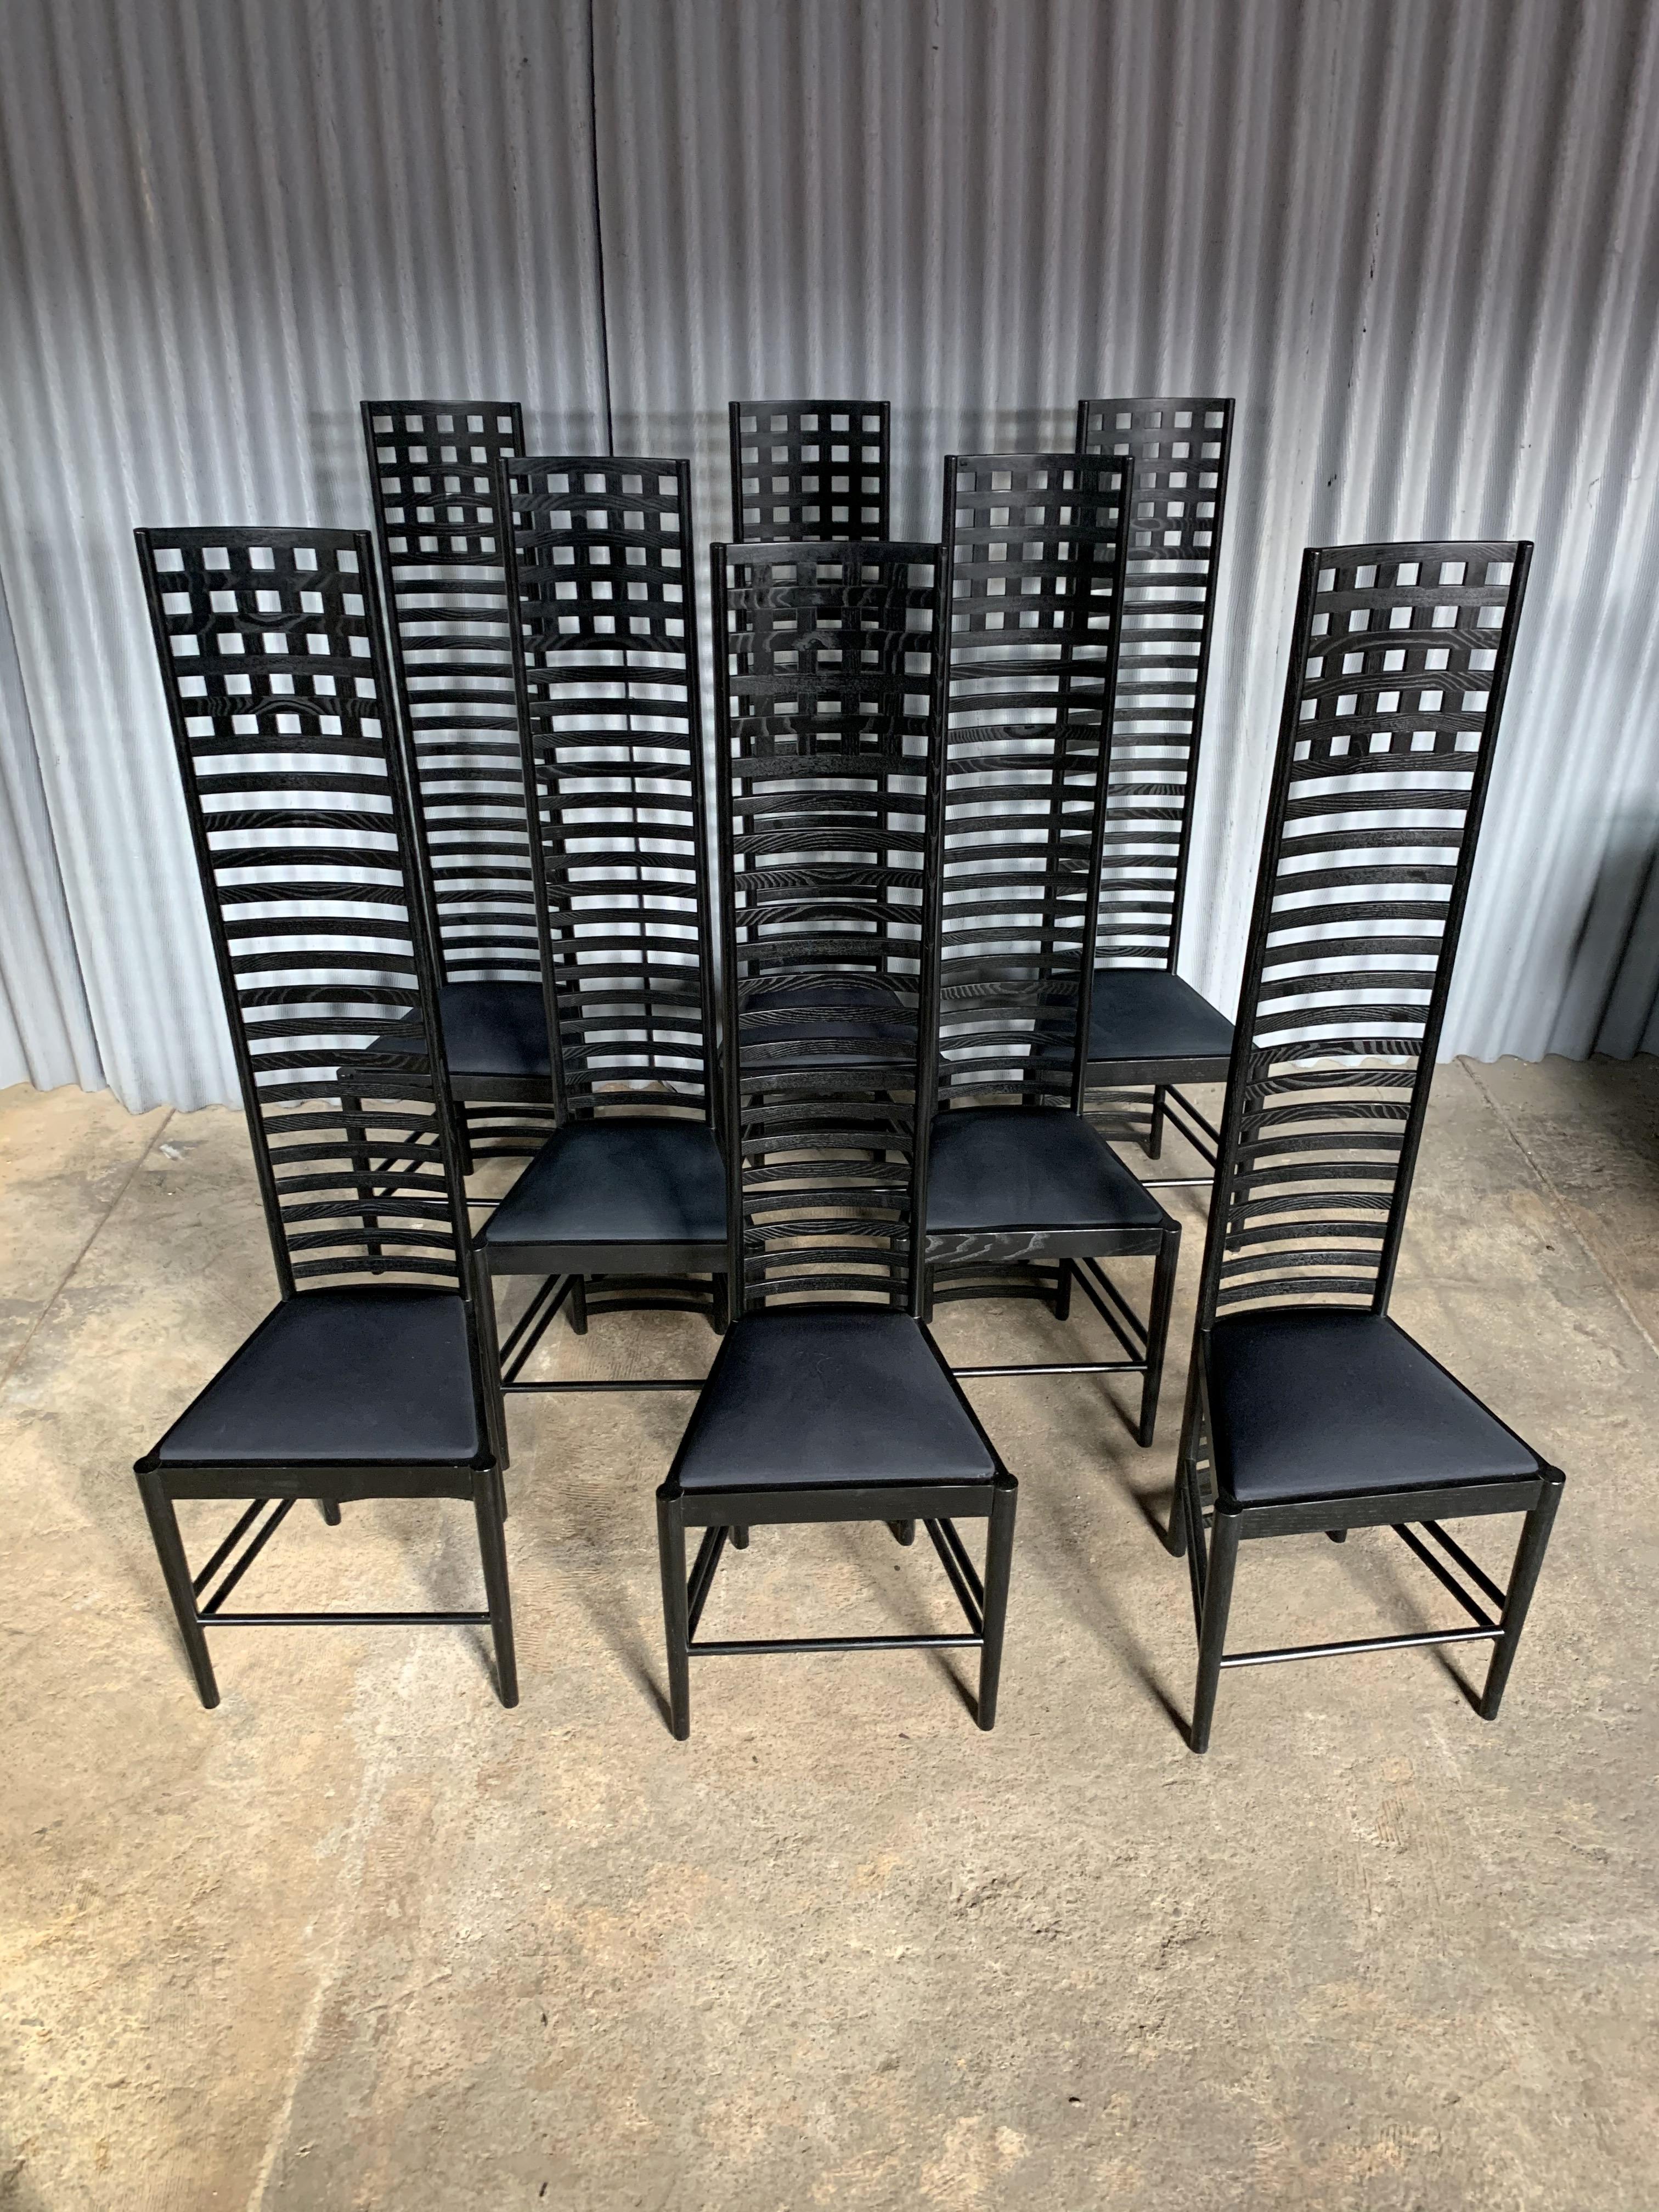 Absolutely fabulous set of chairs after the famously recognizable 292 Hill House chair by Designer Charles Rennie Mackintosh.
All chairs are in incredible condition and came out of the original owner's home.
These chairs are loved by Interior